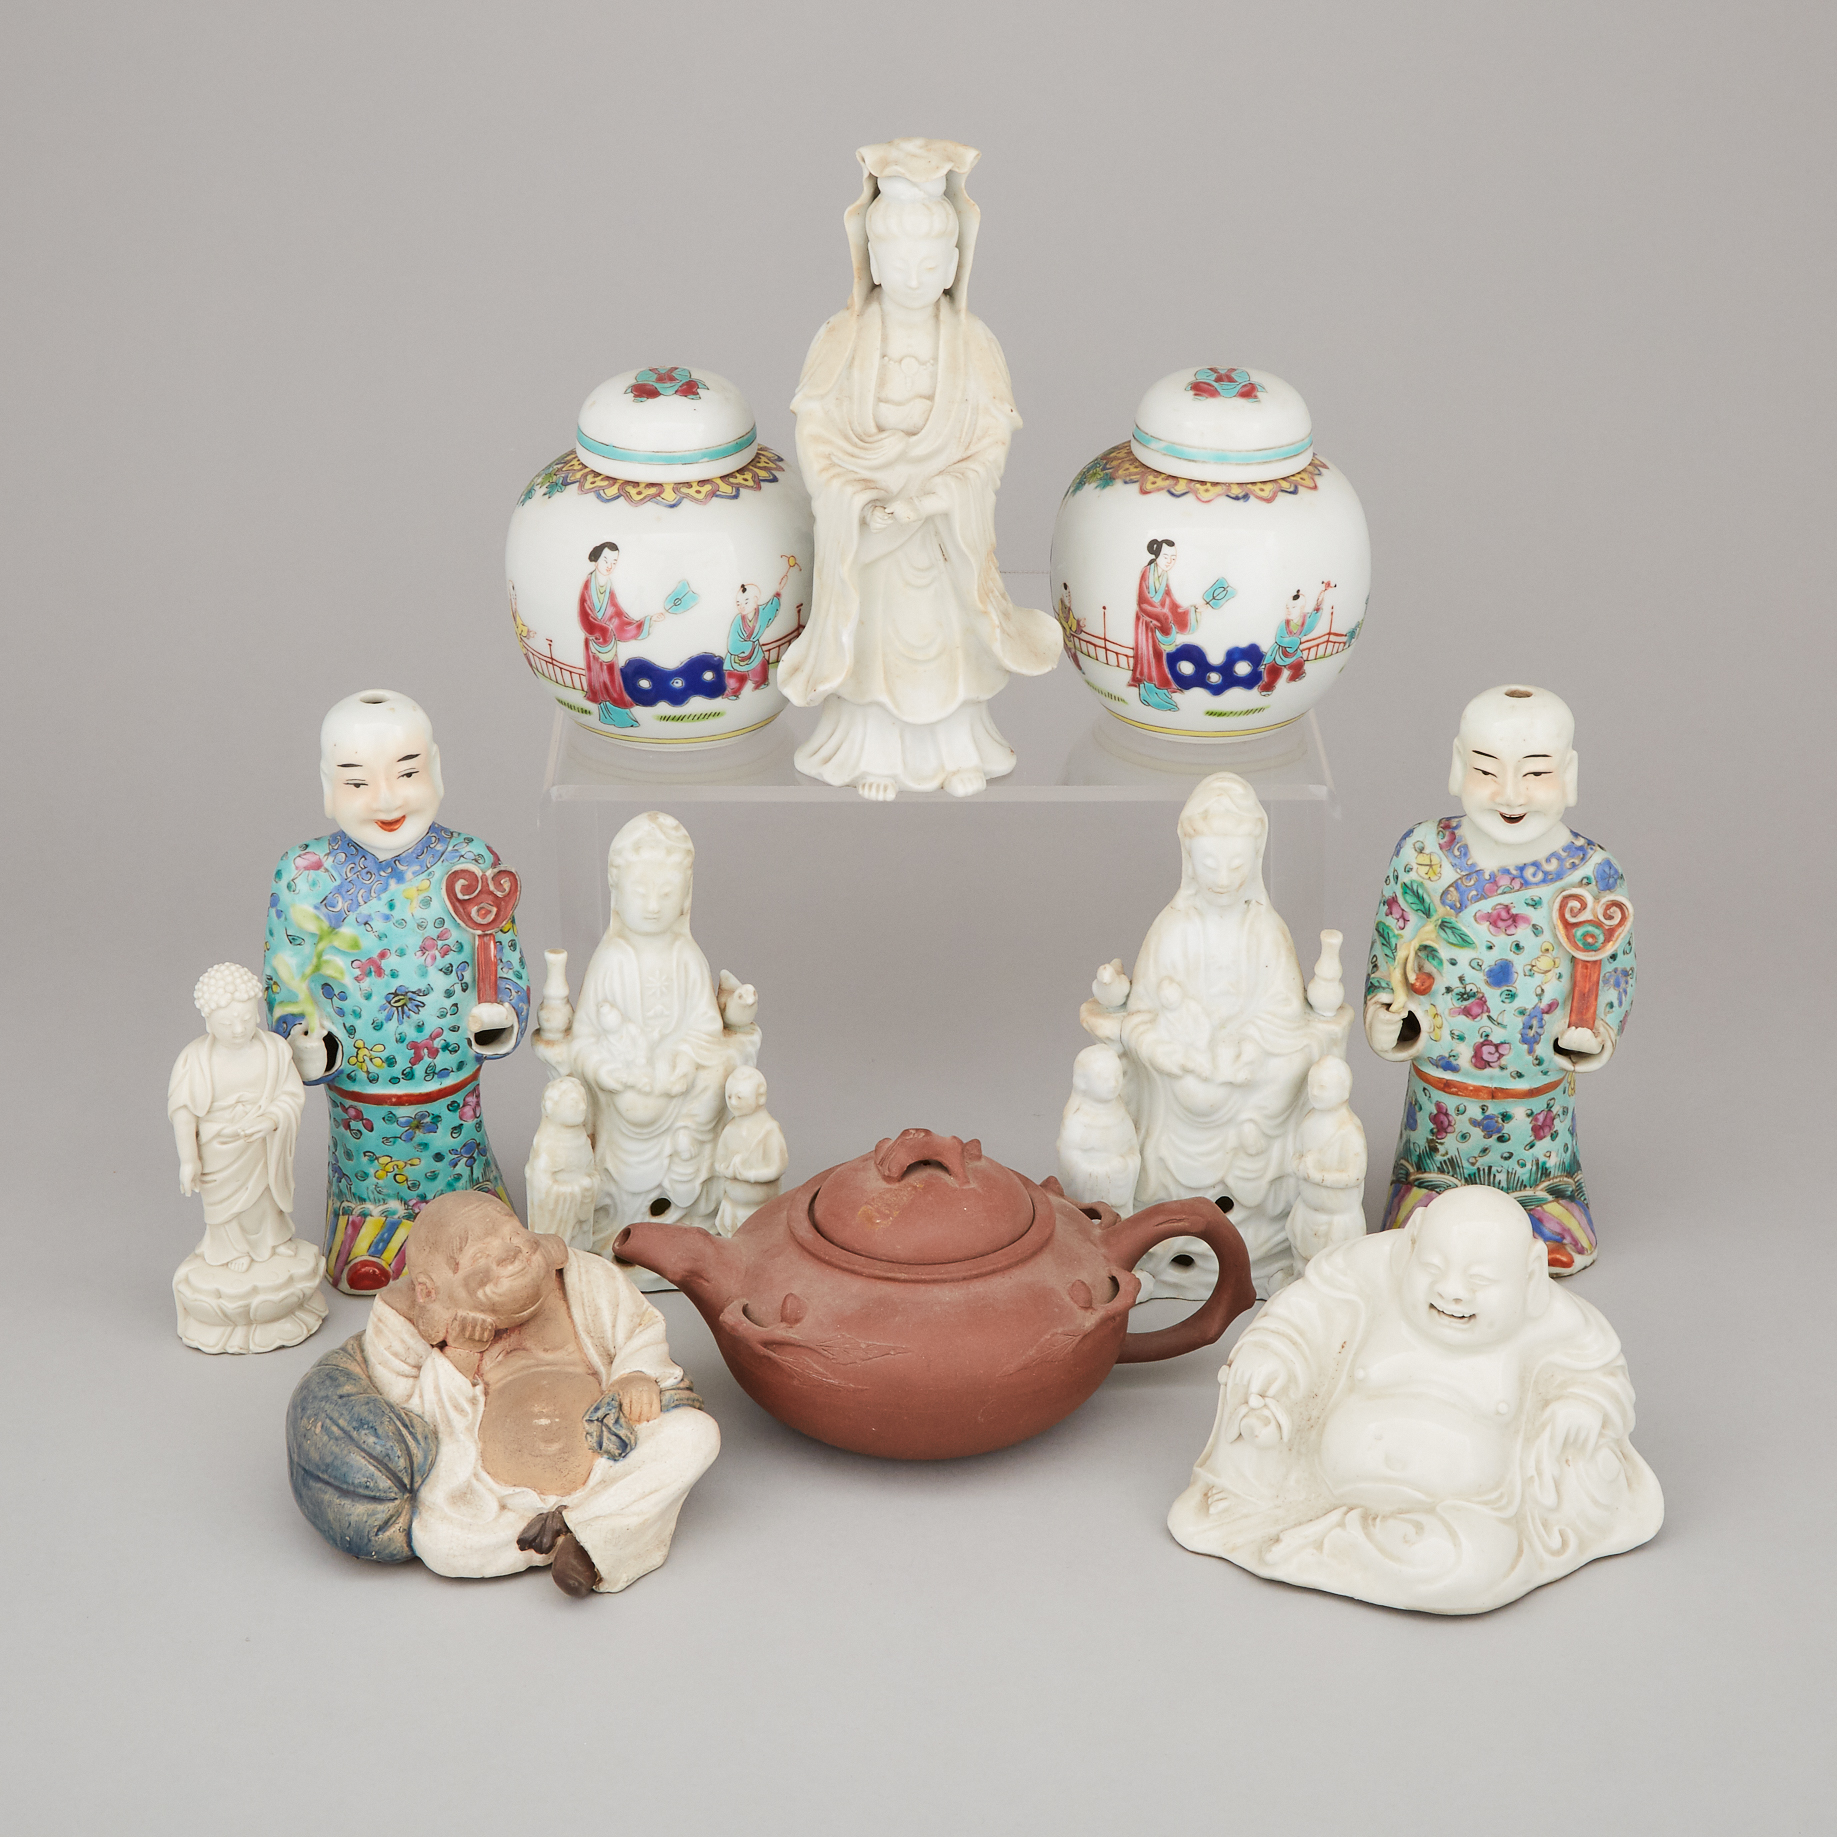 A Group of Eleven Chinese Famille Rose, Blanc de Chine, and Yixing Ceramic Wares